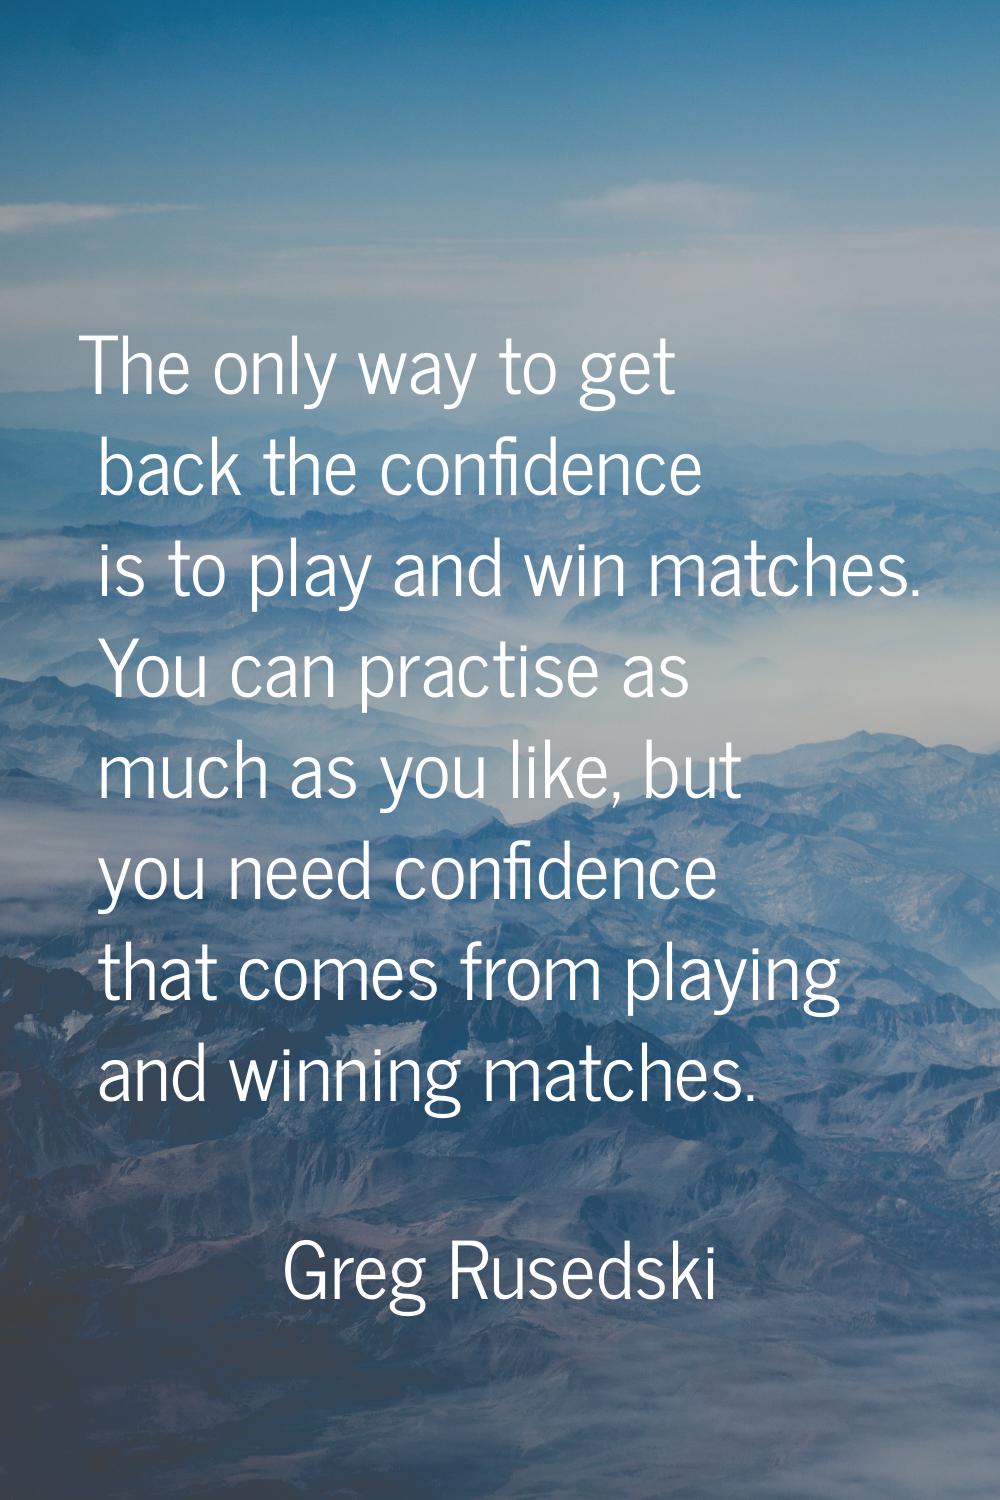 The only way to get back the confidence is to play and win matches. You can practise as much as you